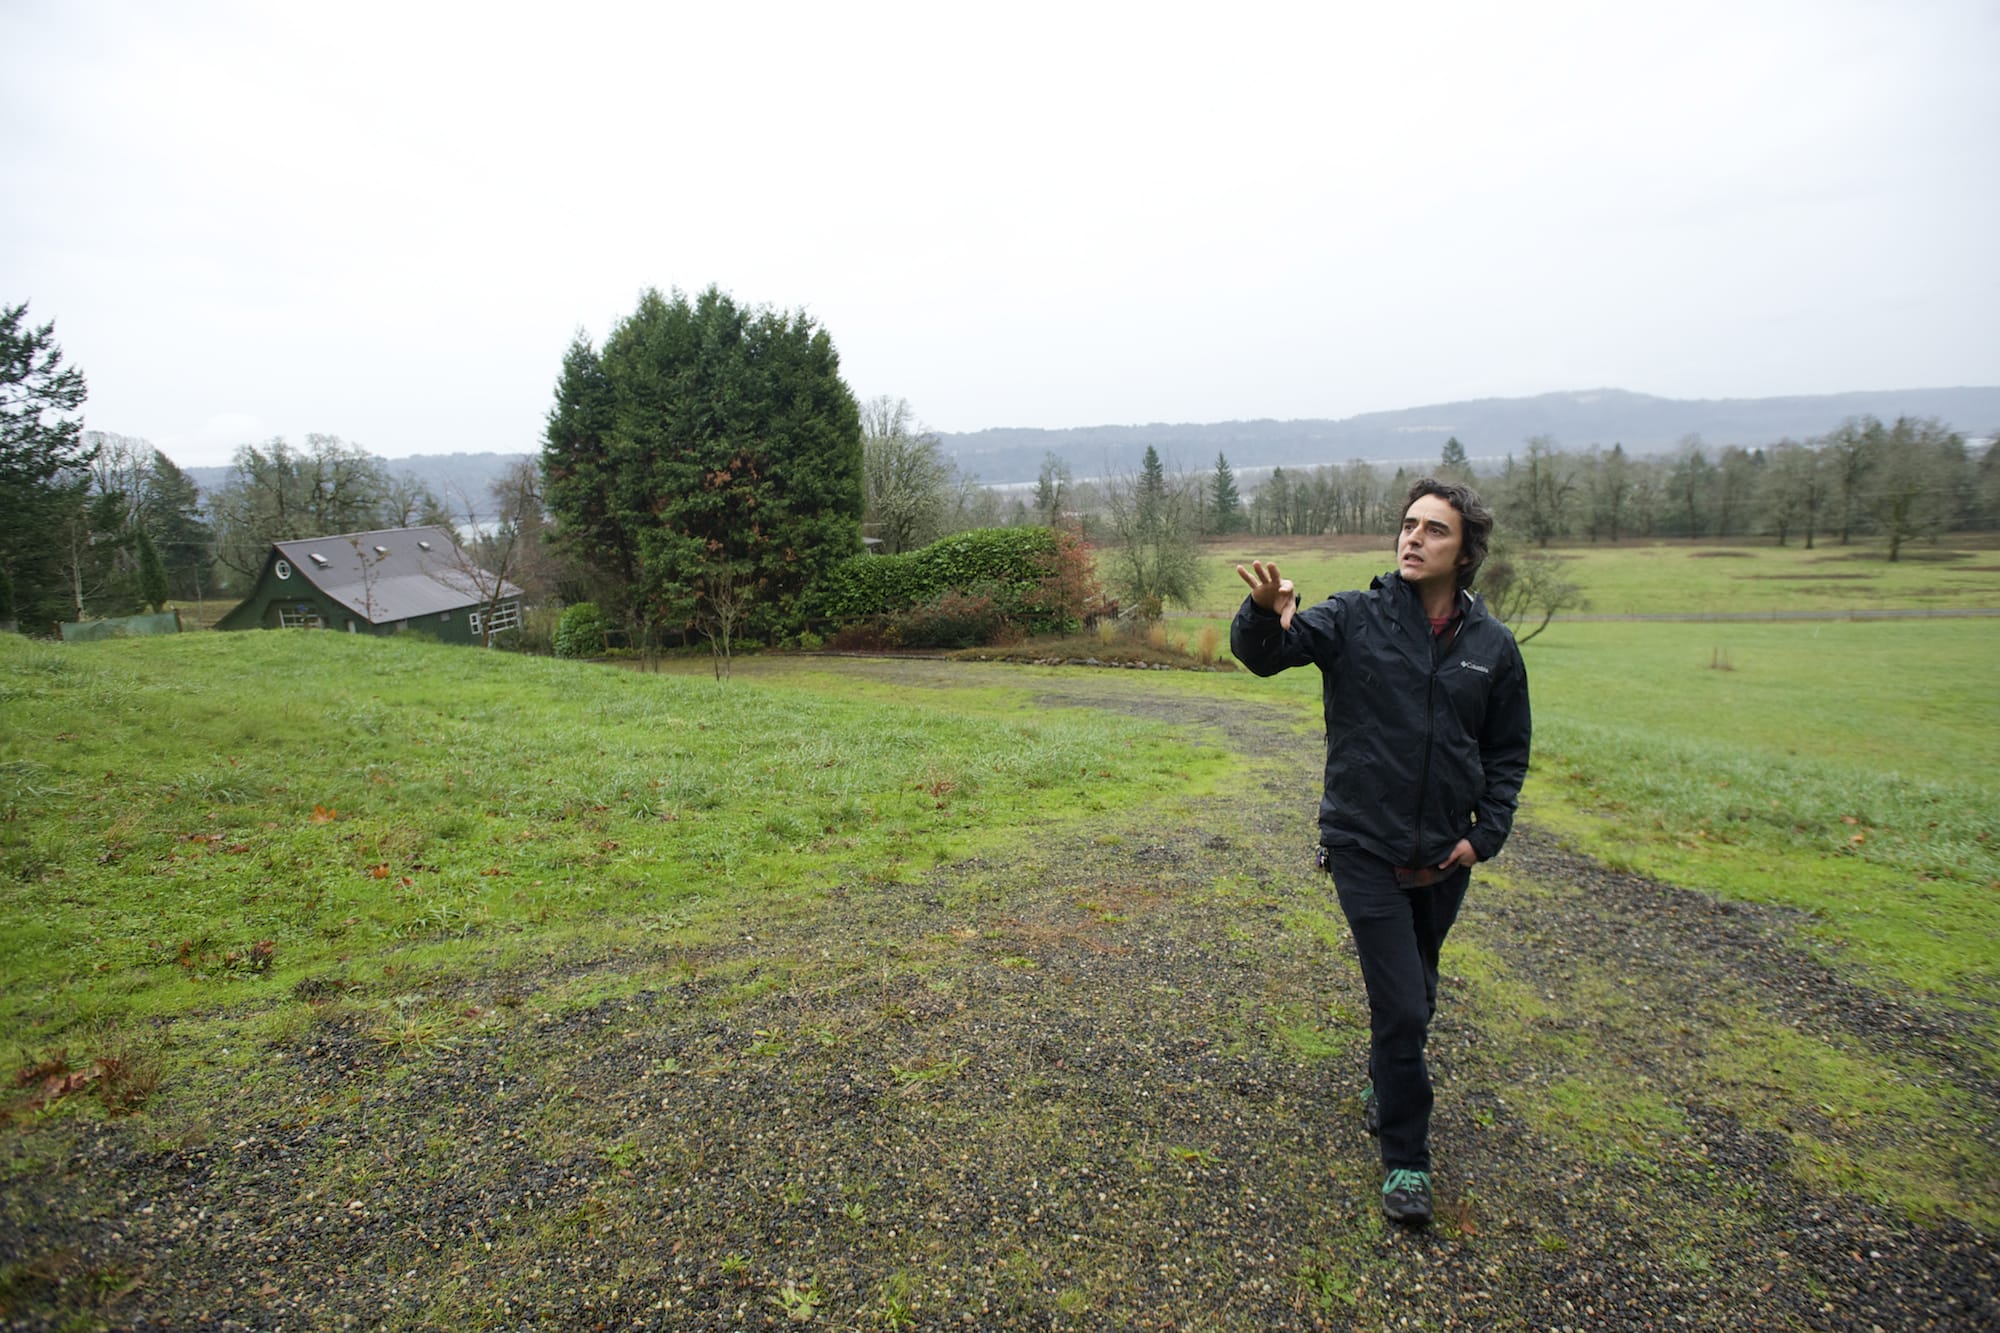 Greg Misarti and his wife, Nell Warren, want to establish an art and ecology center on their property outside Washougal in the Columbia River Gorge National Scenic Area.